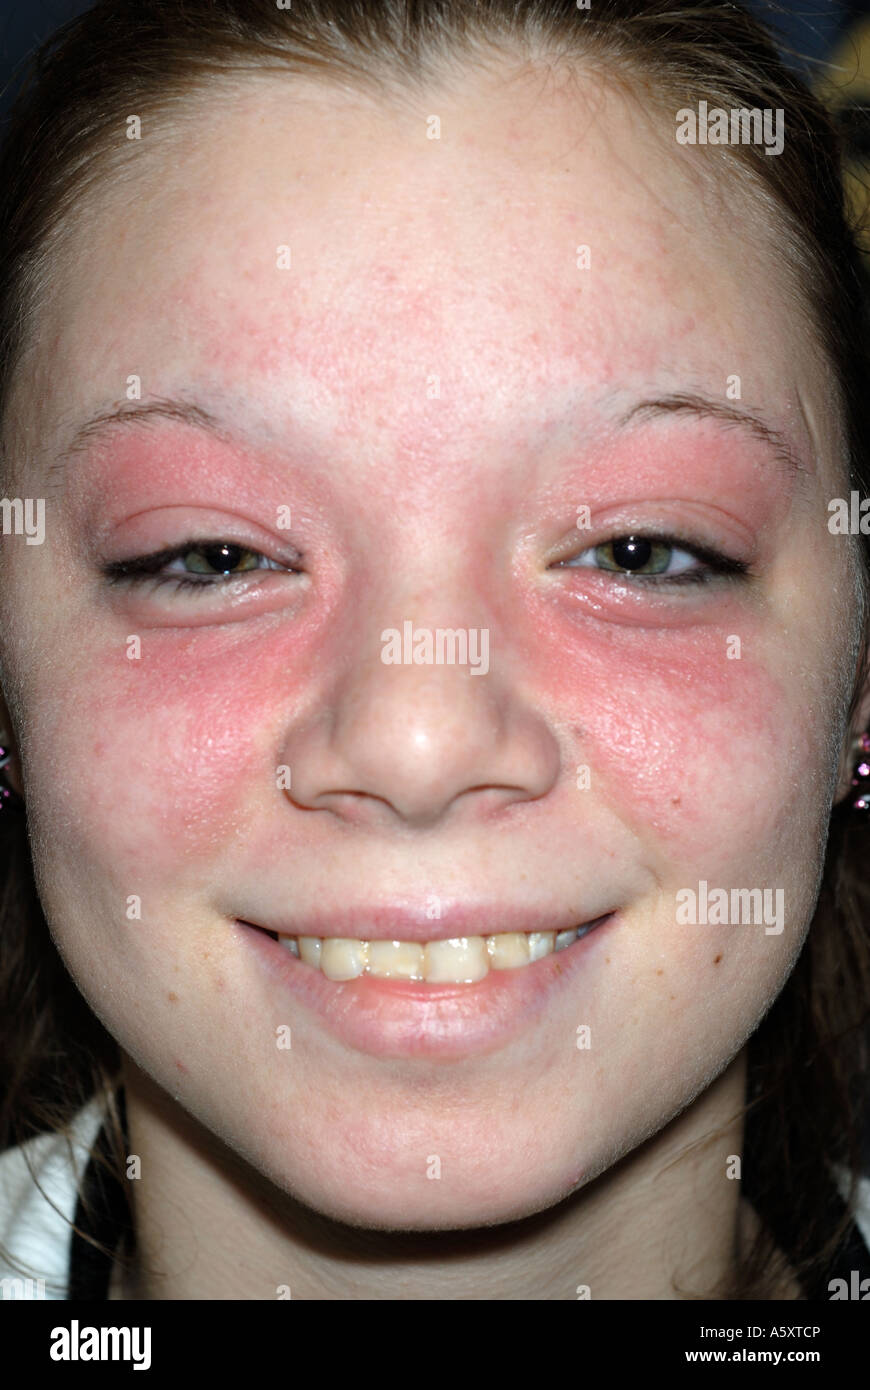 skin rash of contact dermatitis on the face of a 16 year old girl Stock Photo